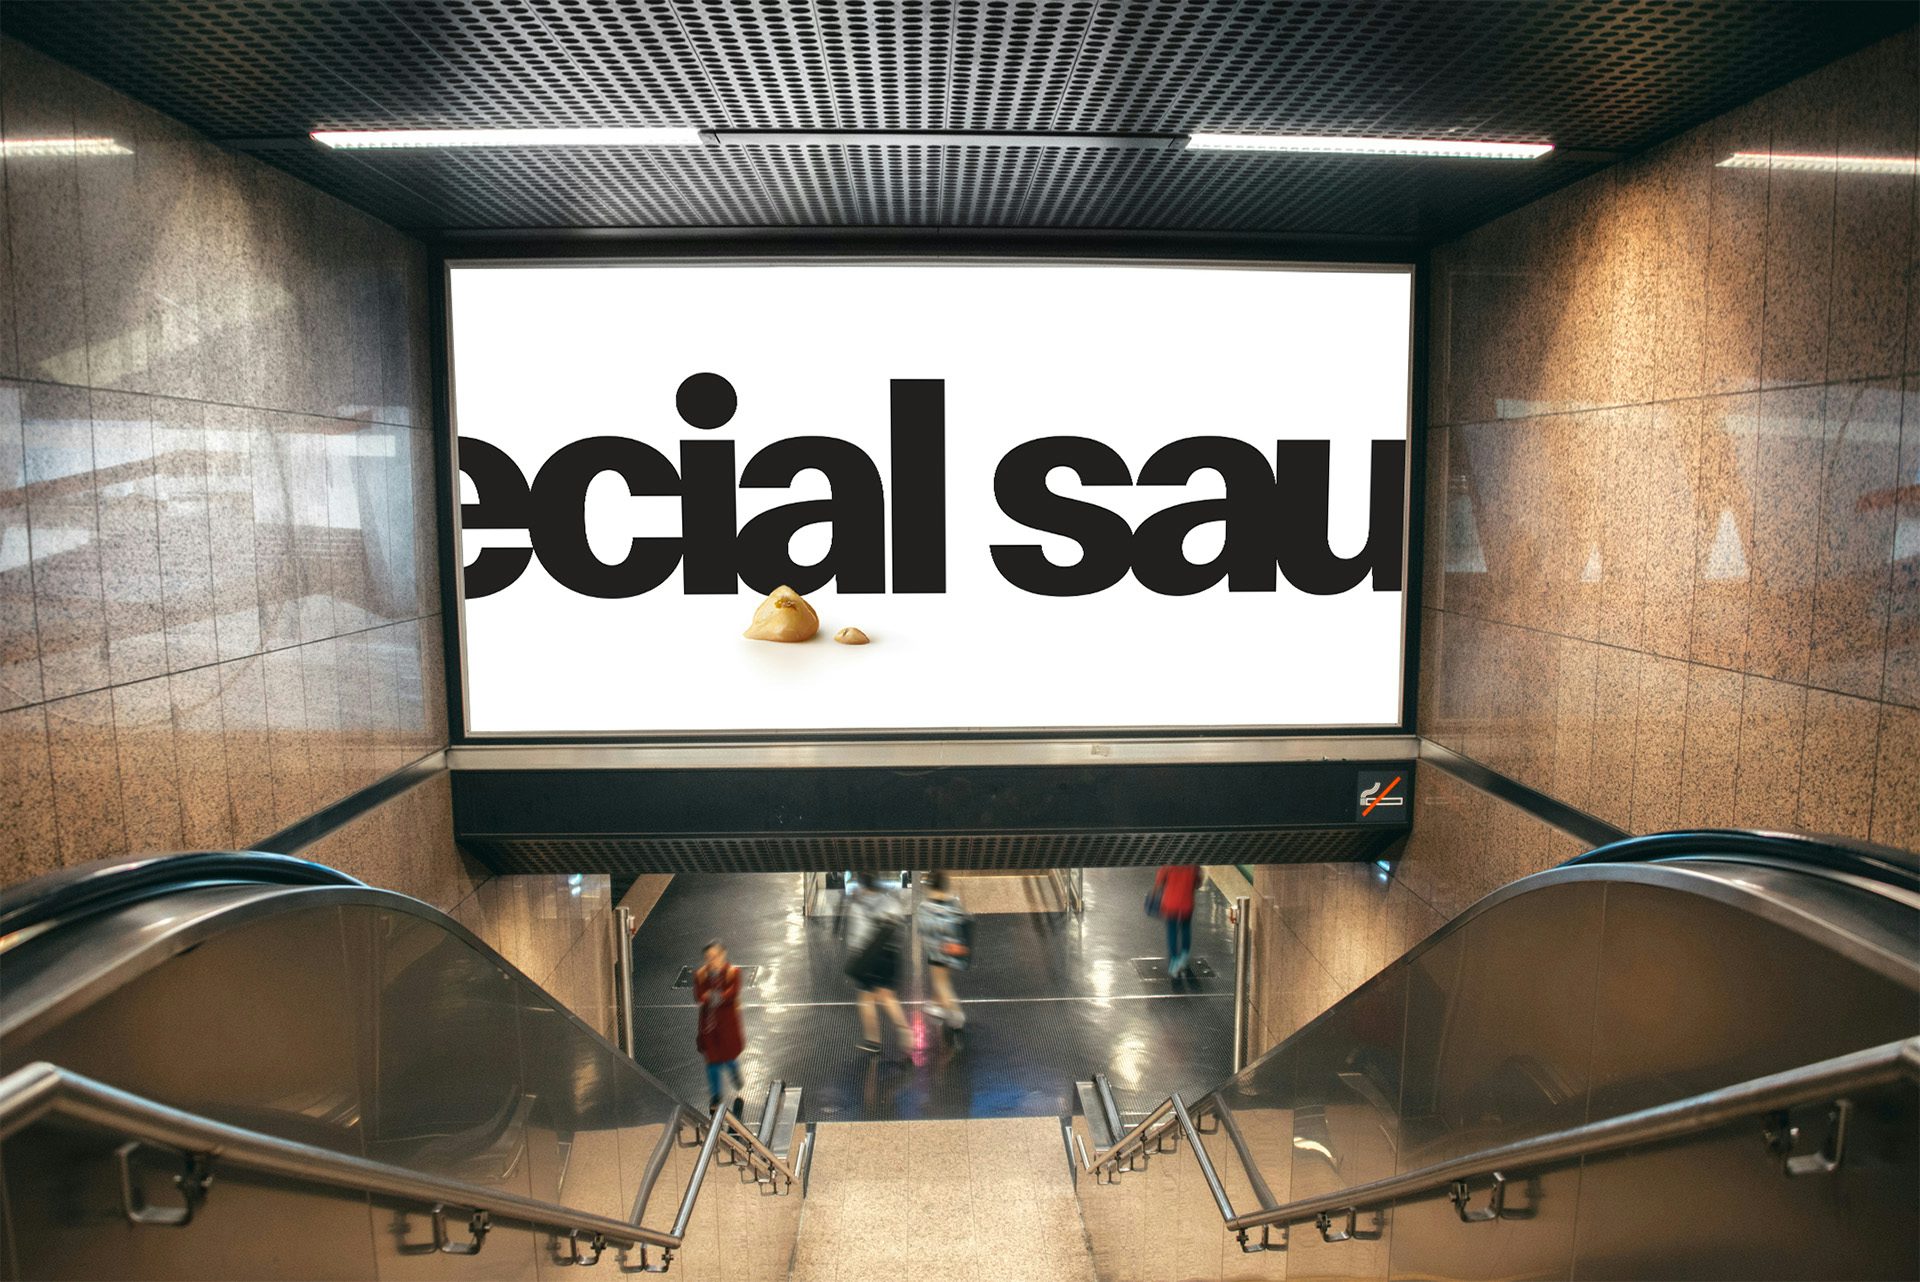 Public transport stairway with an overheard billboard featuring a deliberately cut-off line that reads 'ecial sau'